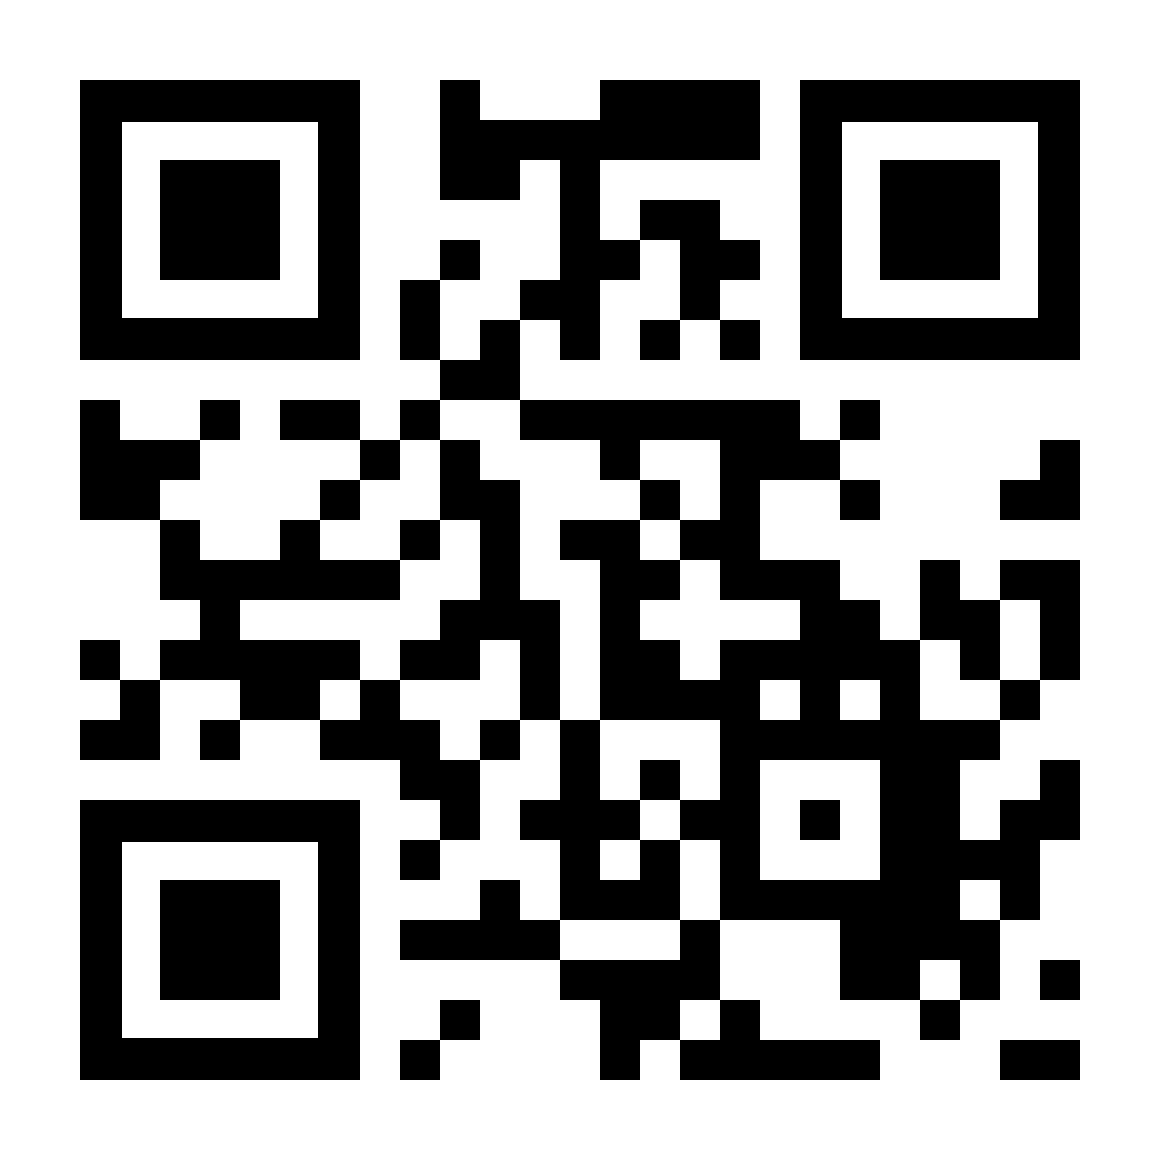 Occupational Health & physiotherapy QR code